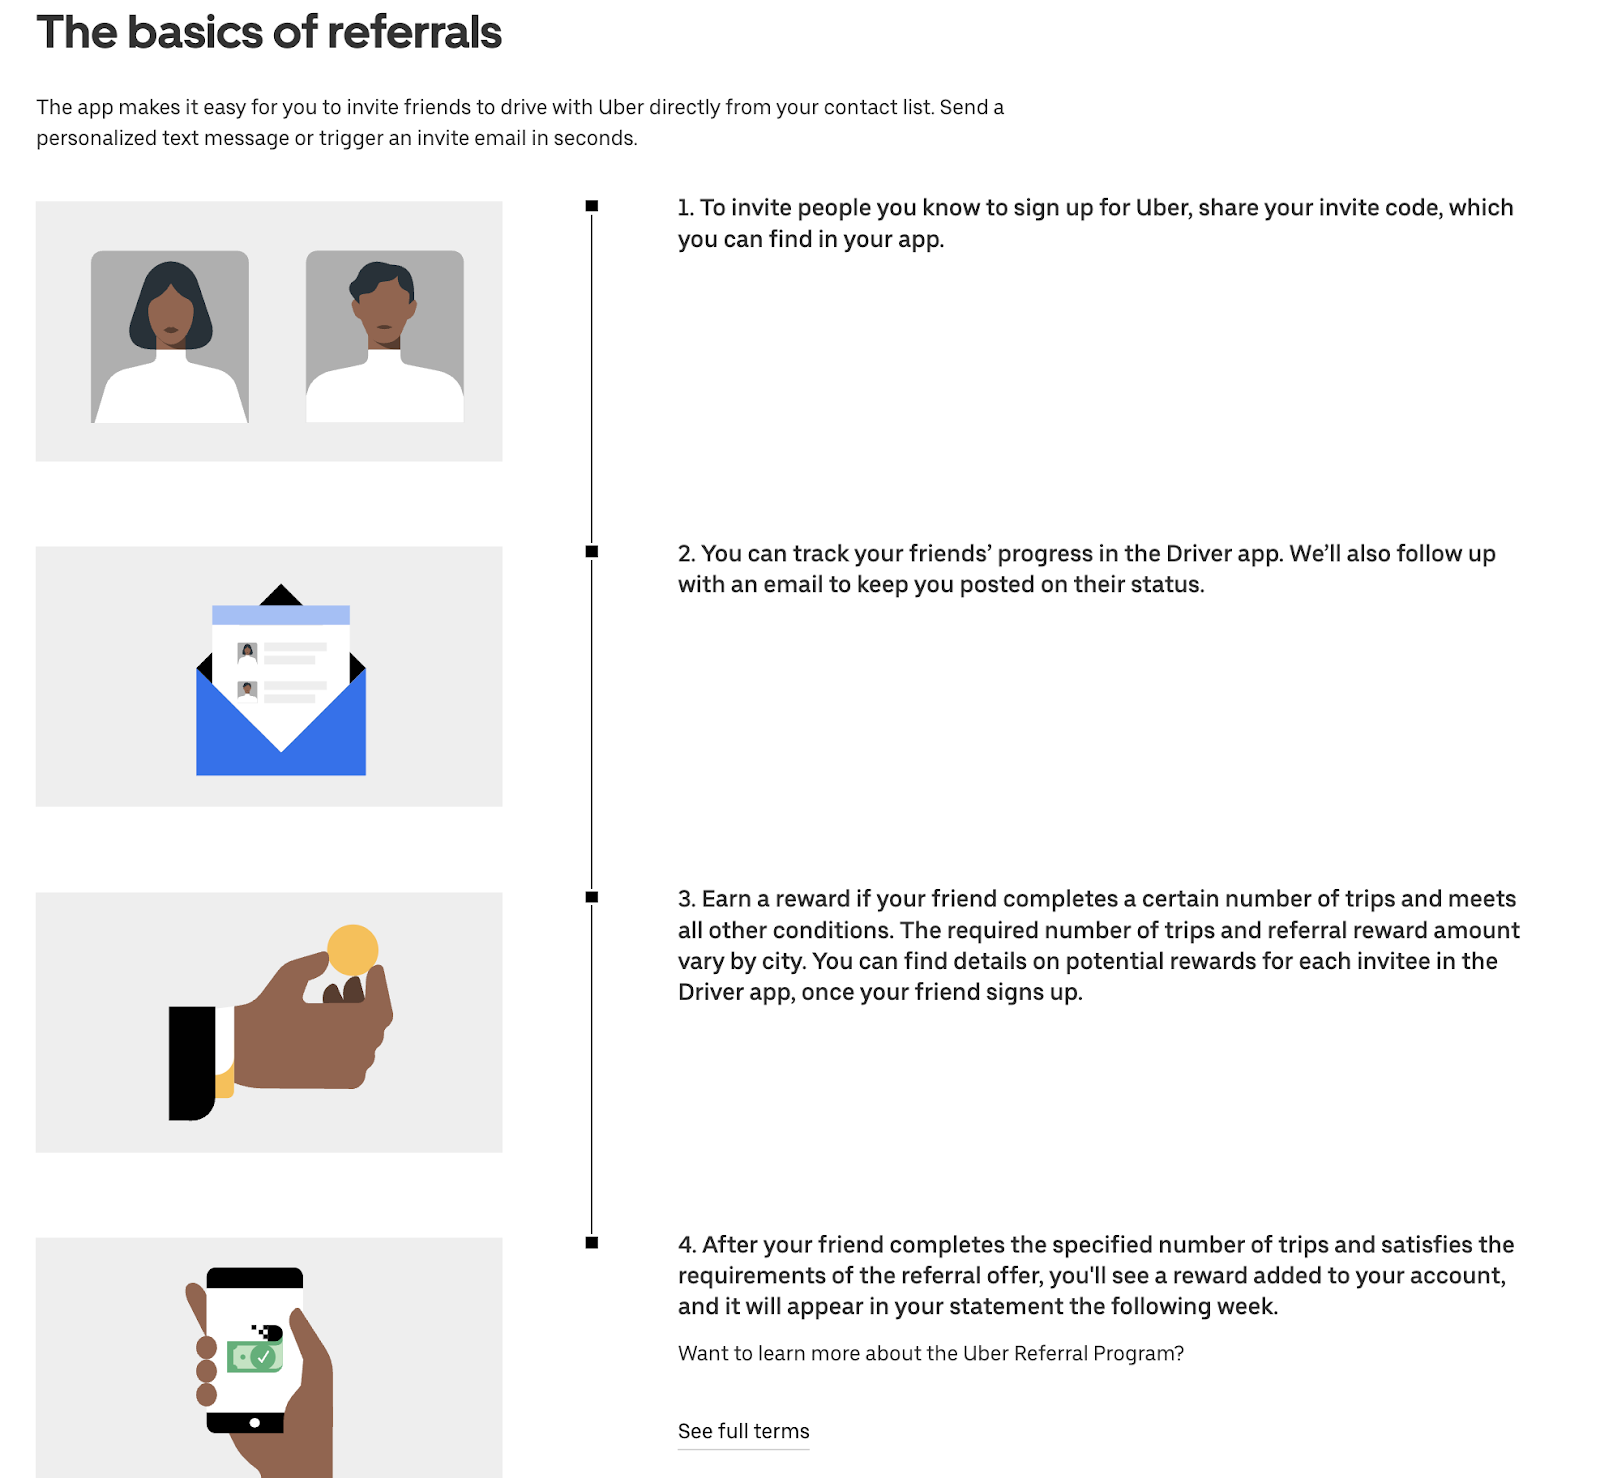 Uber’s refer-a-friend campaign structure explained.